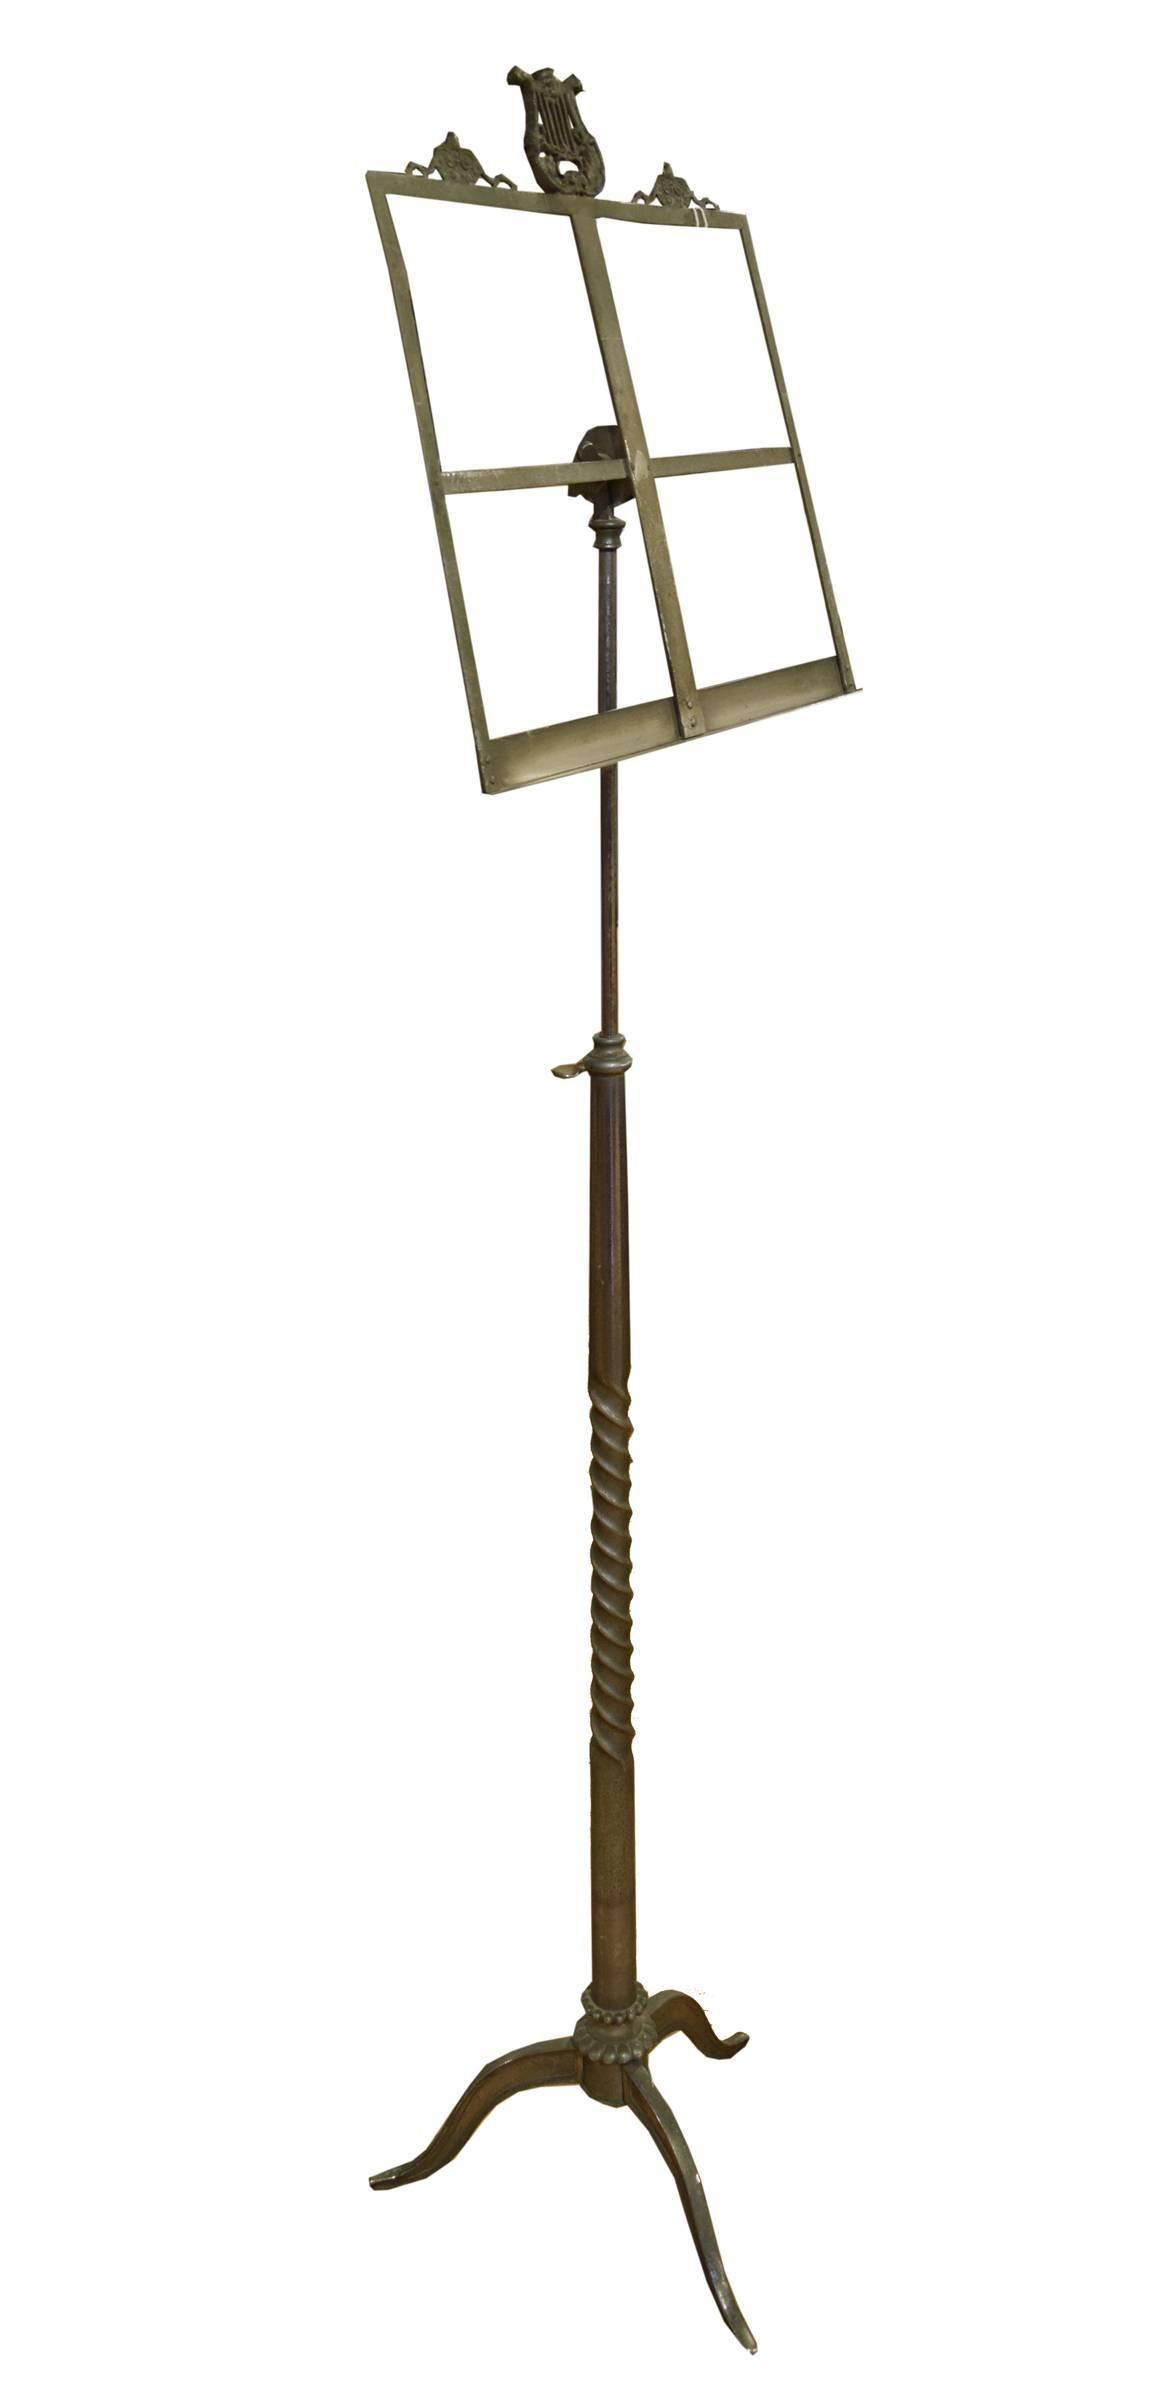 An early 20th century adjustable music stand from Italy. This bronze music stand features a tapered twisted shaft and a harp shaped finial on the top. The total height of the stand adjust from 52